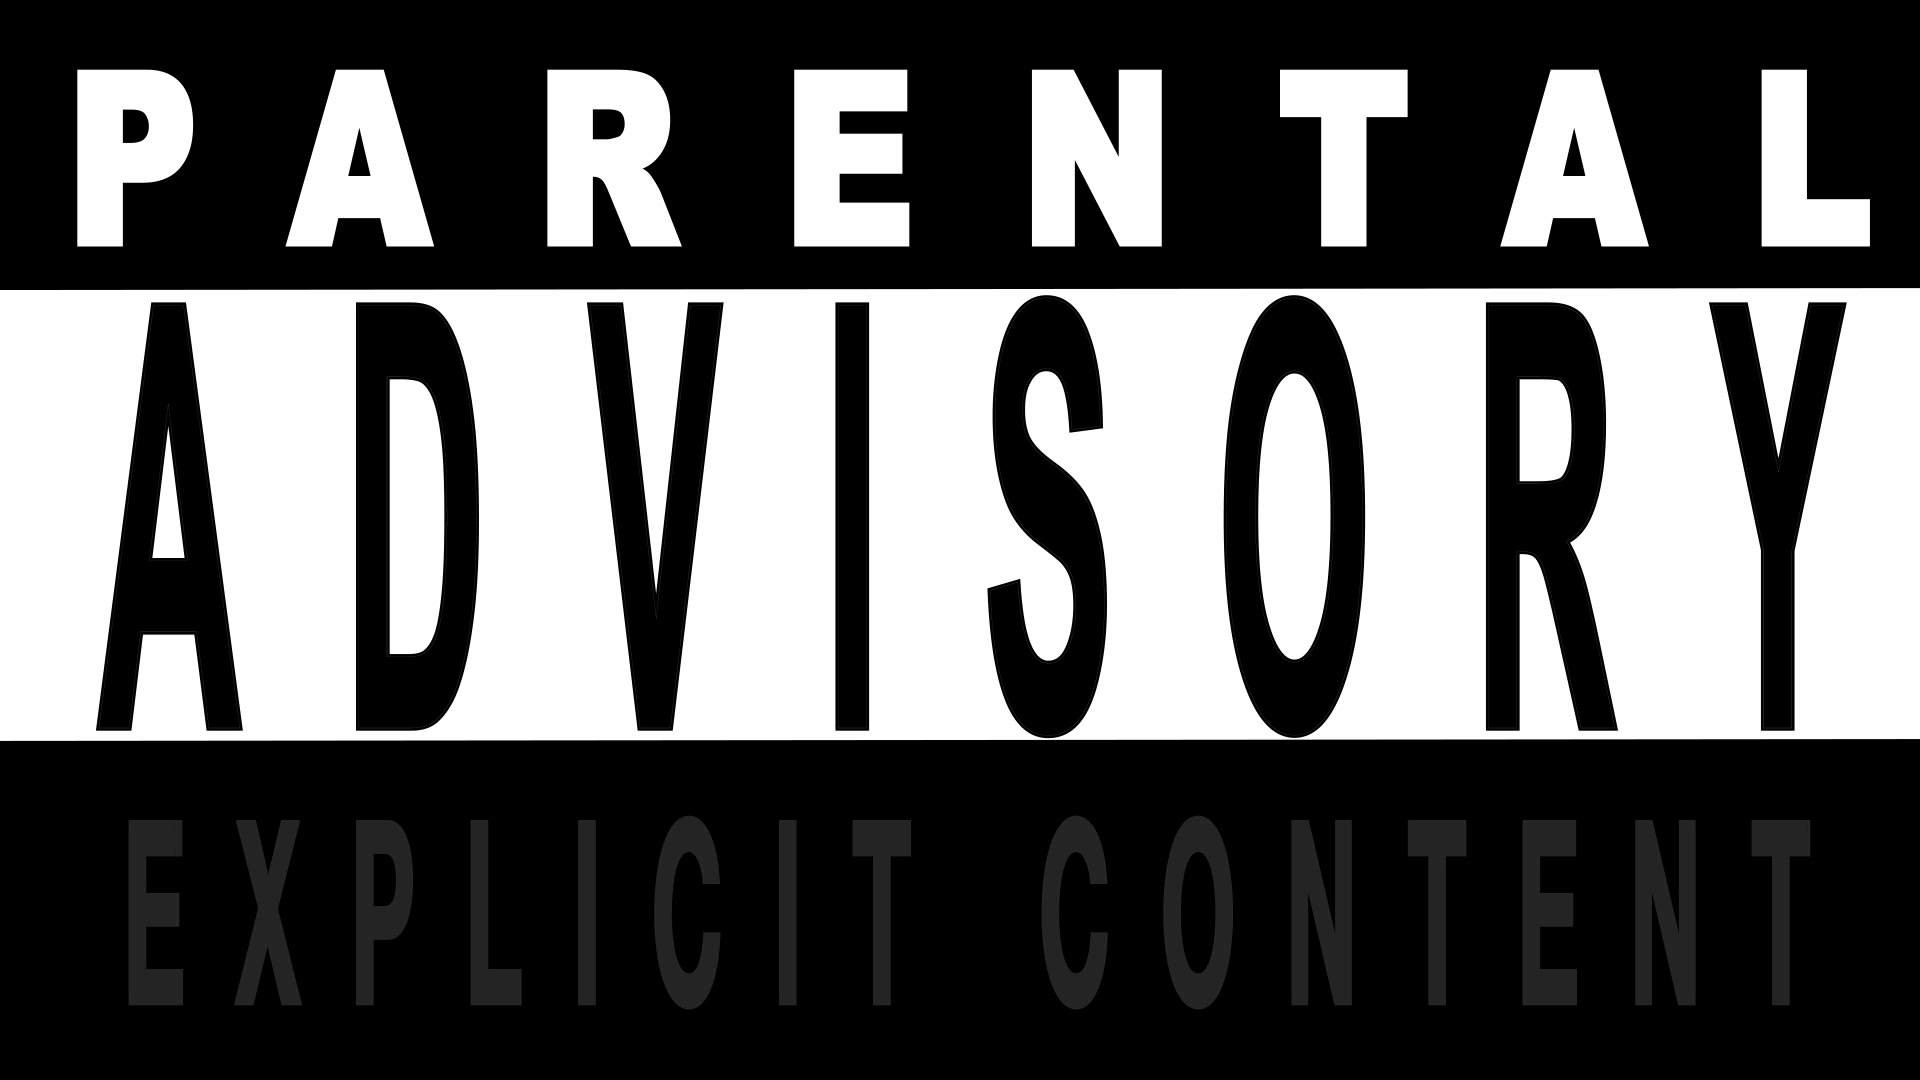 1920x1080 Create Own Parental Advisory Pictures to Pin on Pinterest - PinsDaddy